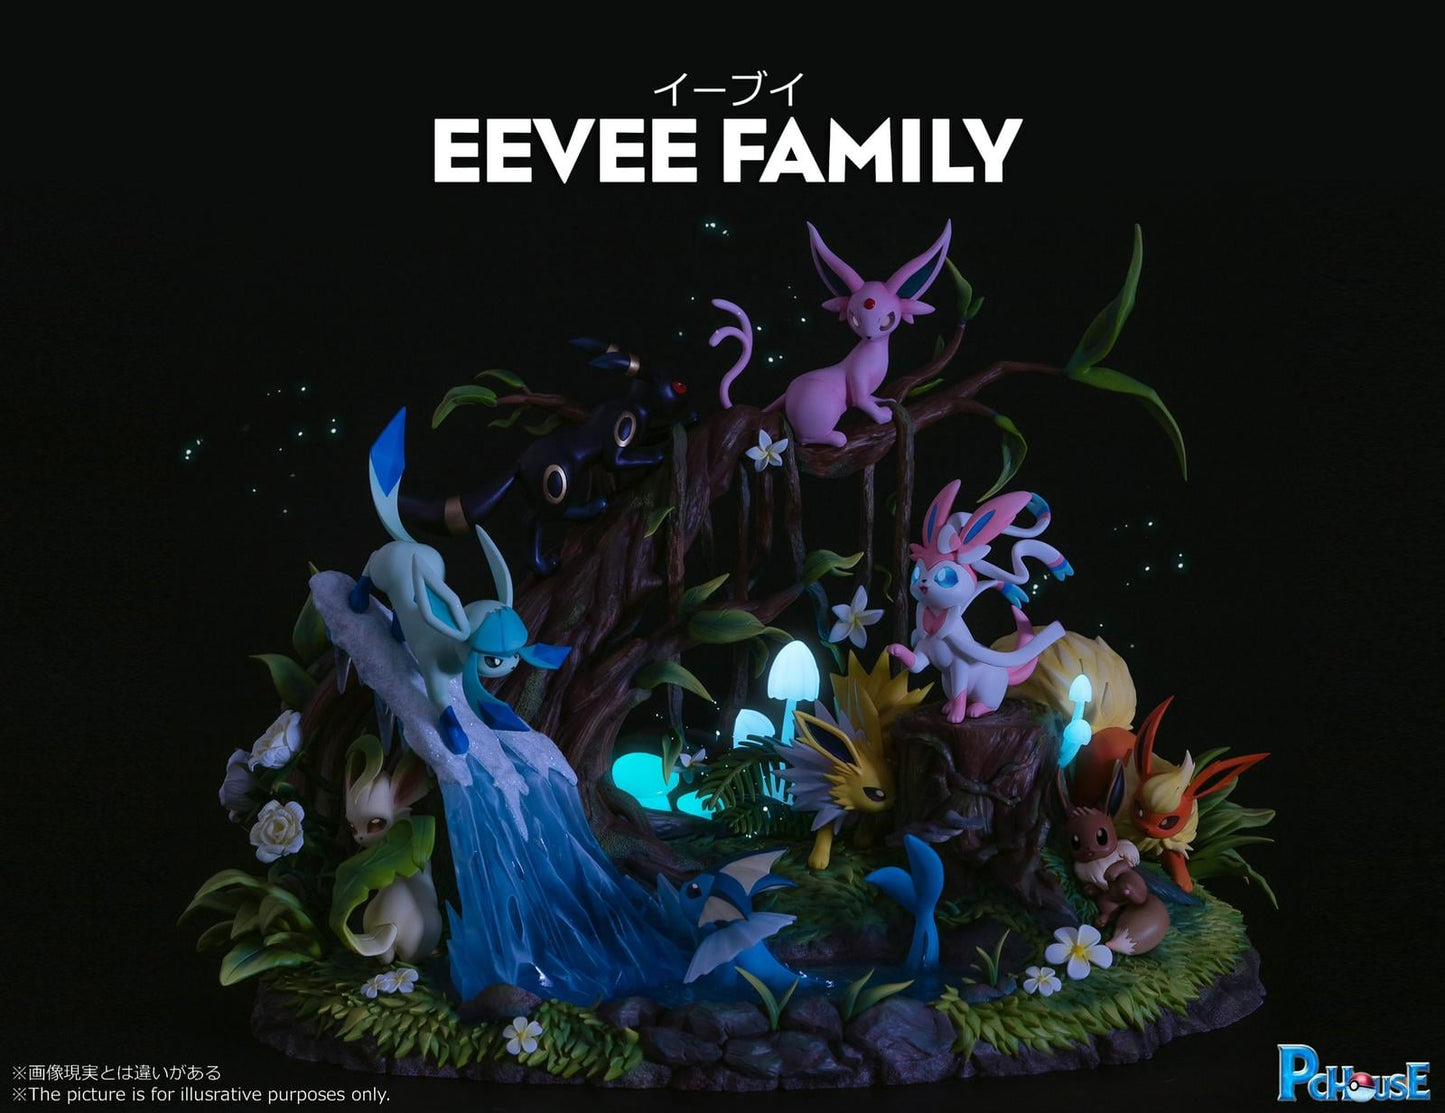 PC HOUSE STUDIO – POKEMON: EEVEE FAMILY [SOLD OUT]